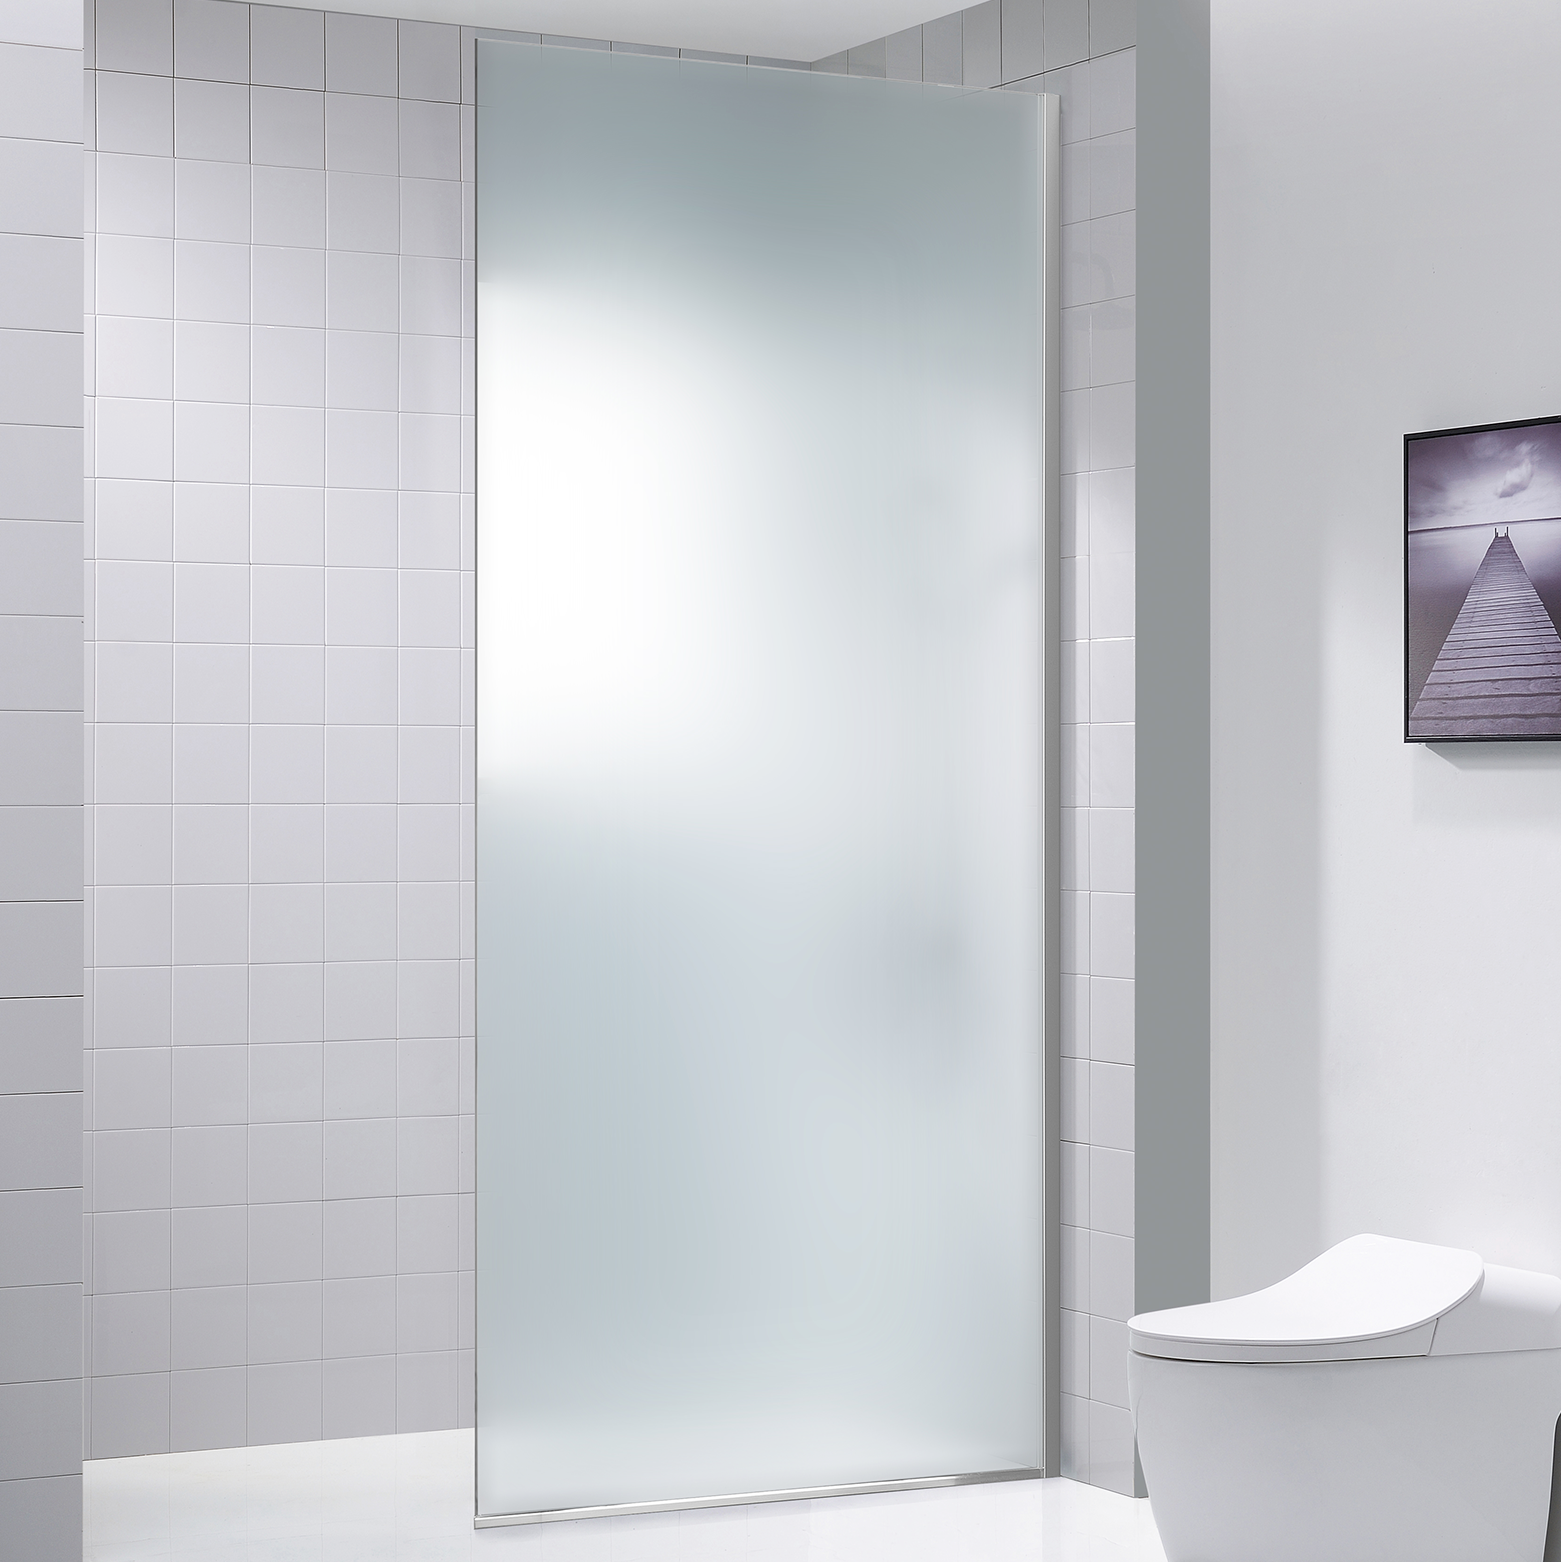 Dreamwerks 35.4"W x 79"H Frameless Fixed Shower Door in Chrome - Available in Clear or Frosted Glass